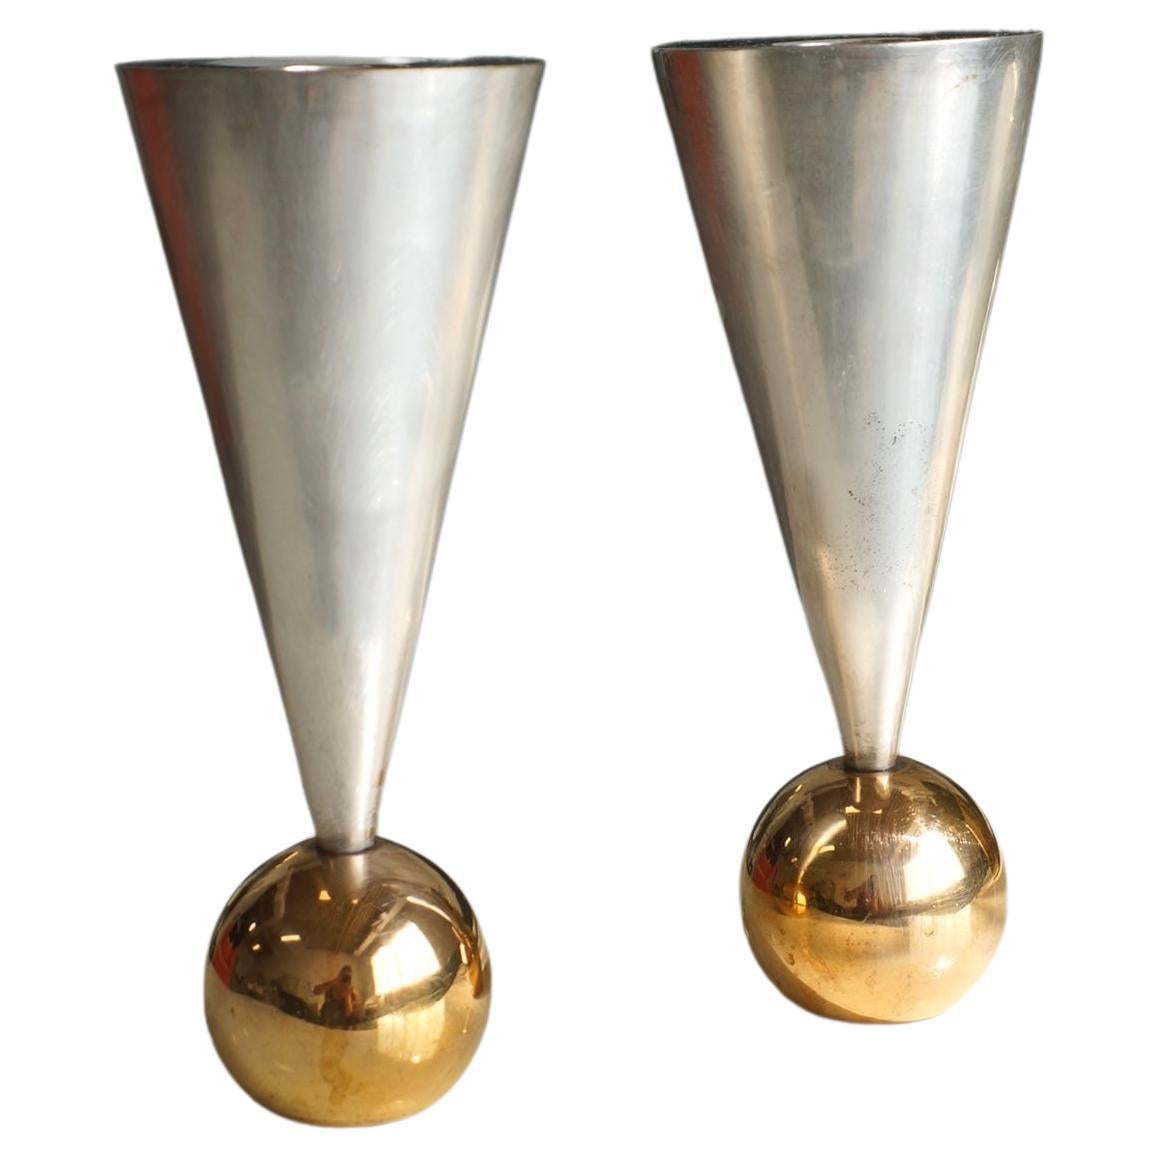 Sculptural Postmodern Geometric Silver and Brass Plated Candle Holders 